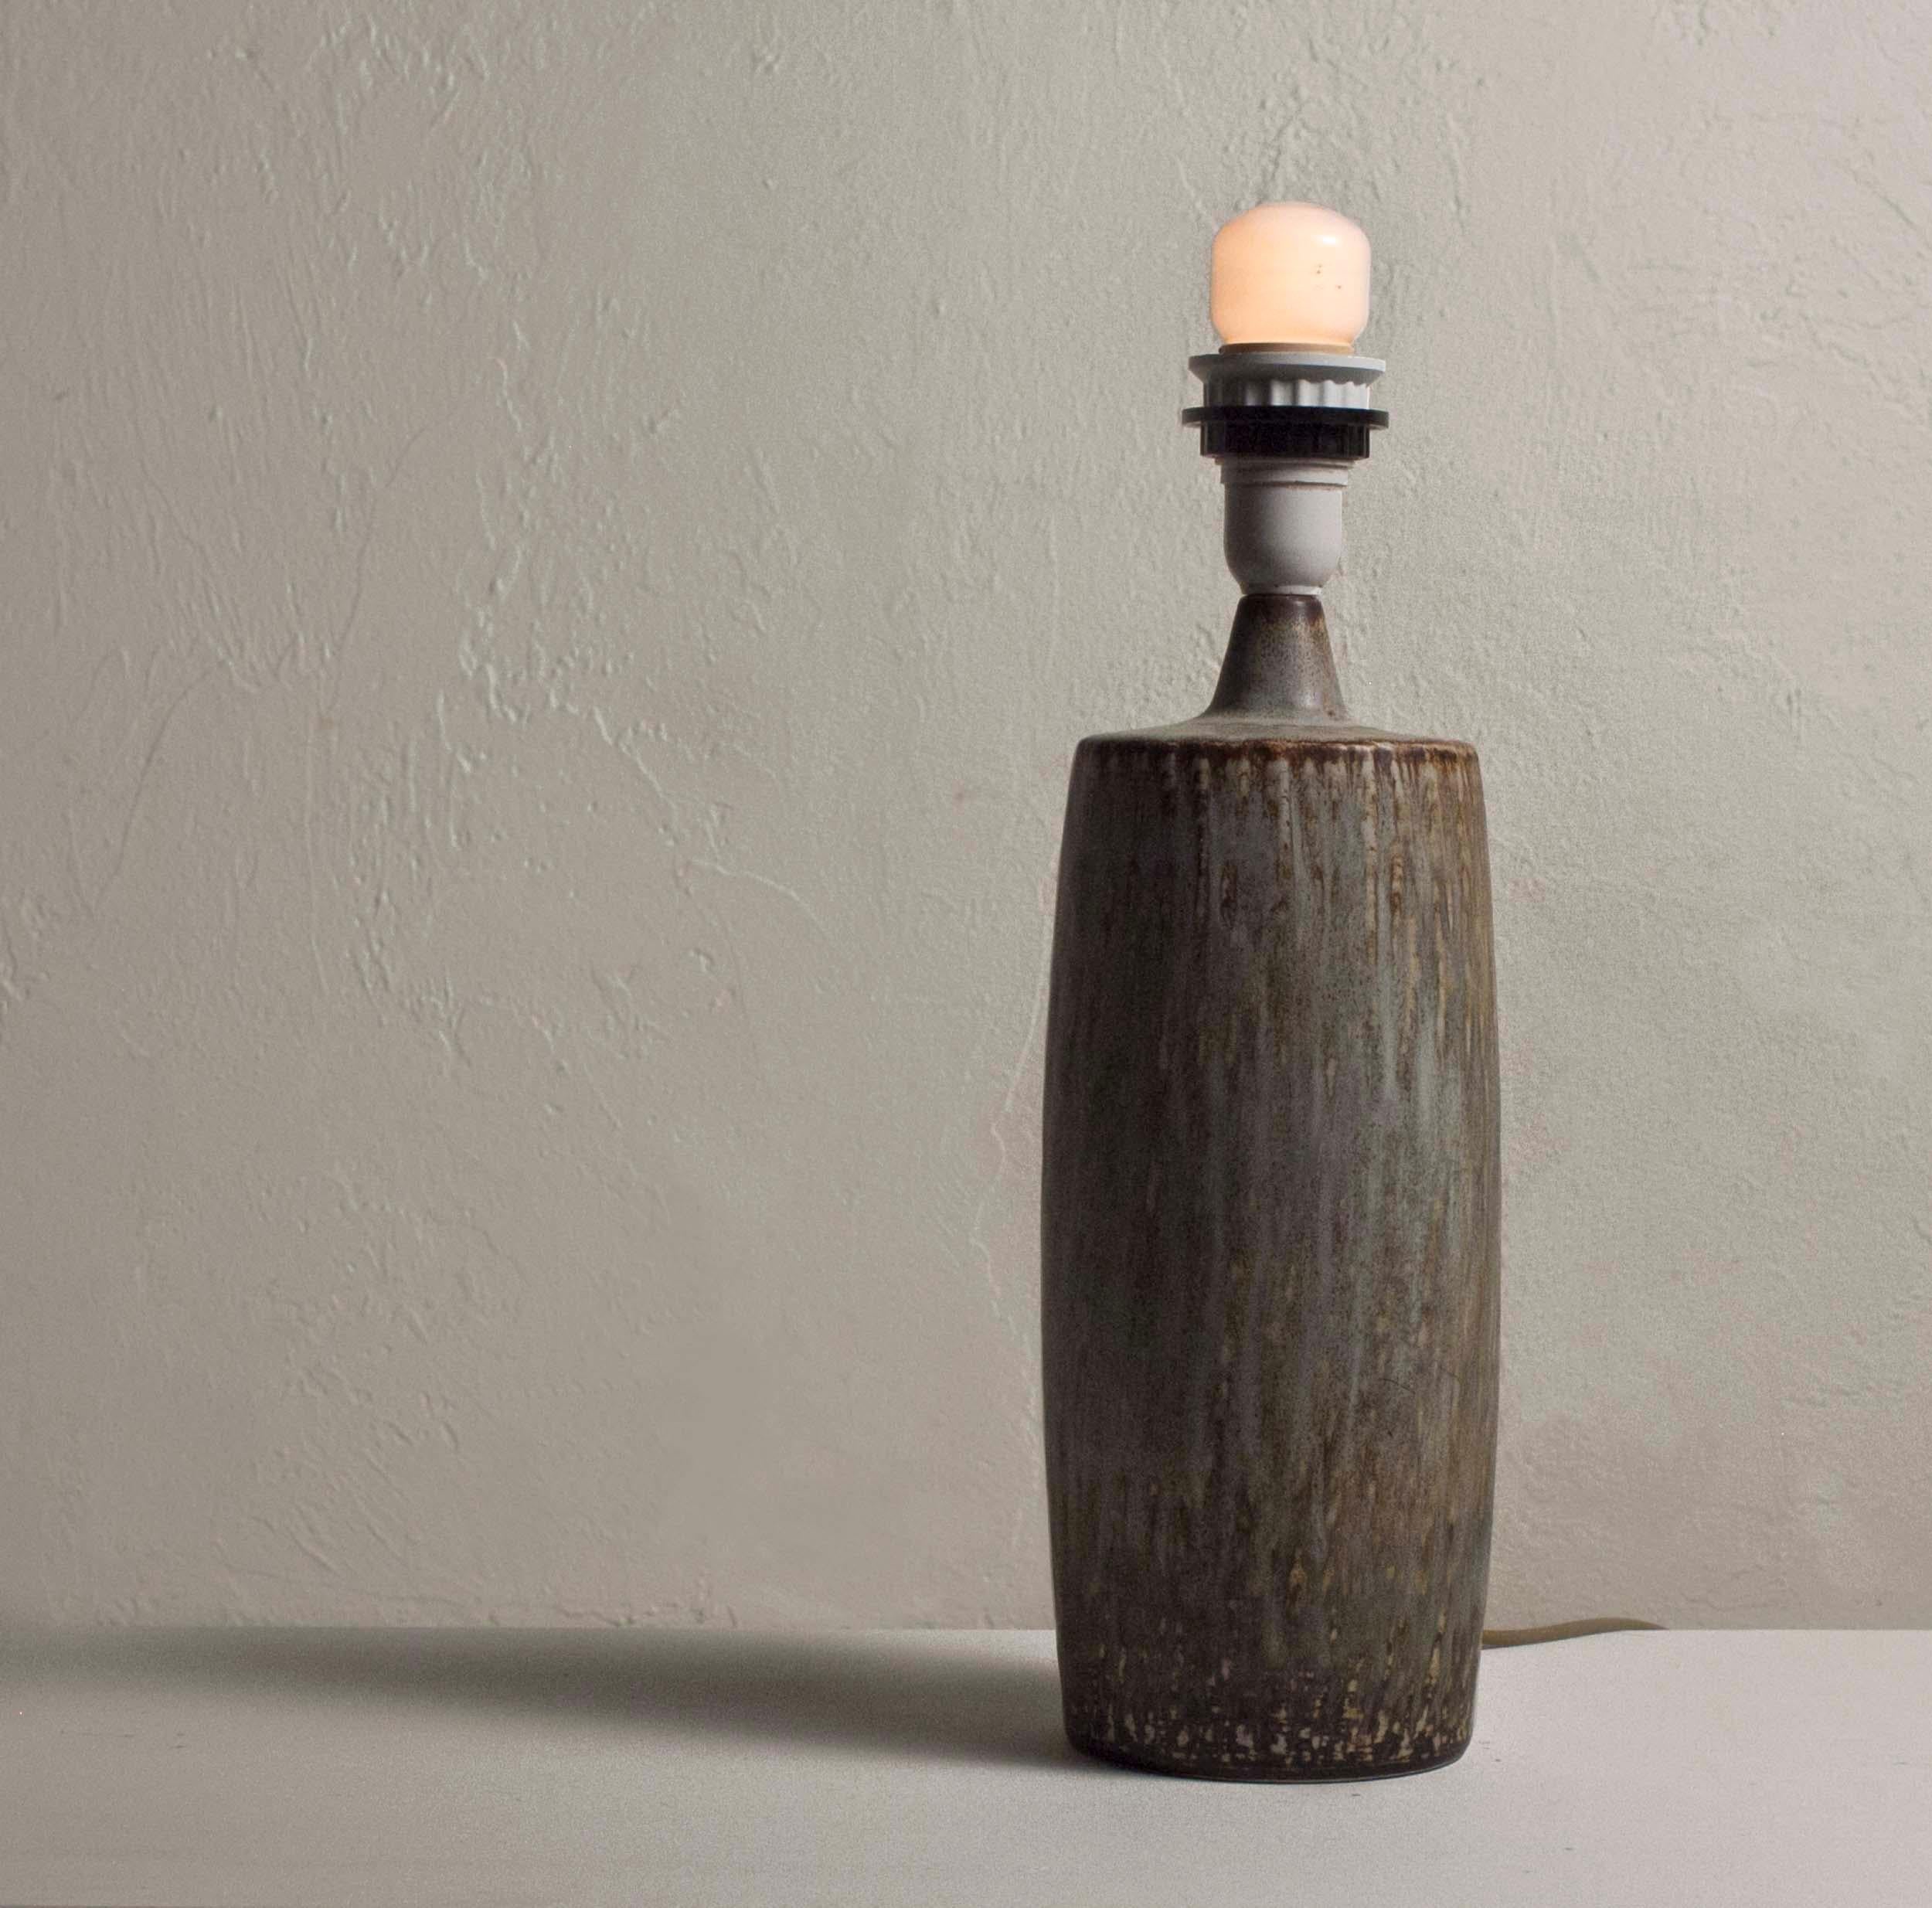 Gunnar Nylund ceramics lamp “Rubus” for Rörstrand, Sweden, 1950s-1960s

Gunnar Nylund, table lamp, Rörstrand, signed, glazed stoneware, measures: height (with lamp holder) about 40 cm.

Tall table lamp designed by the Swedish ceramic designer,